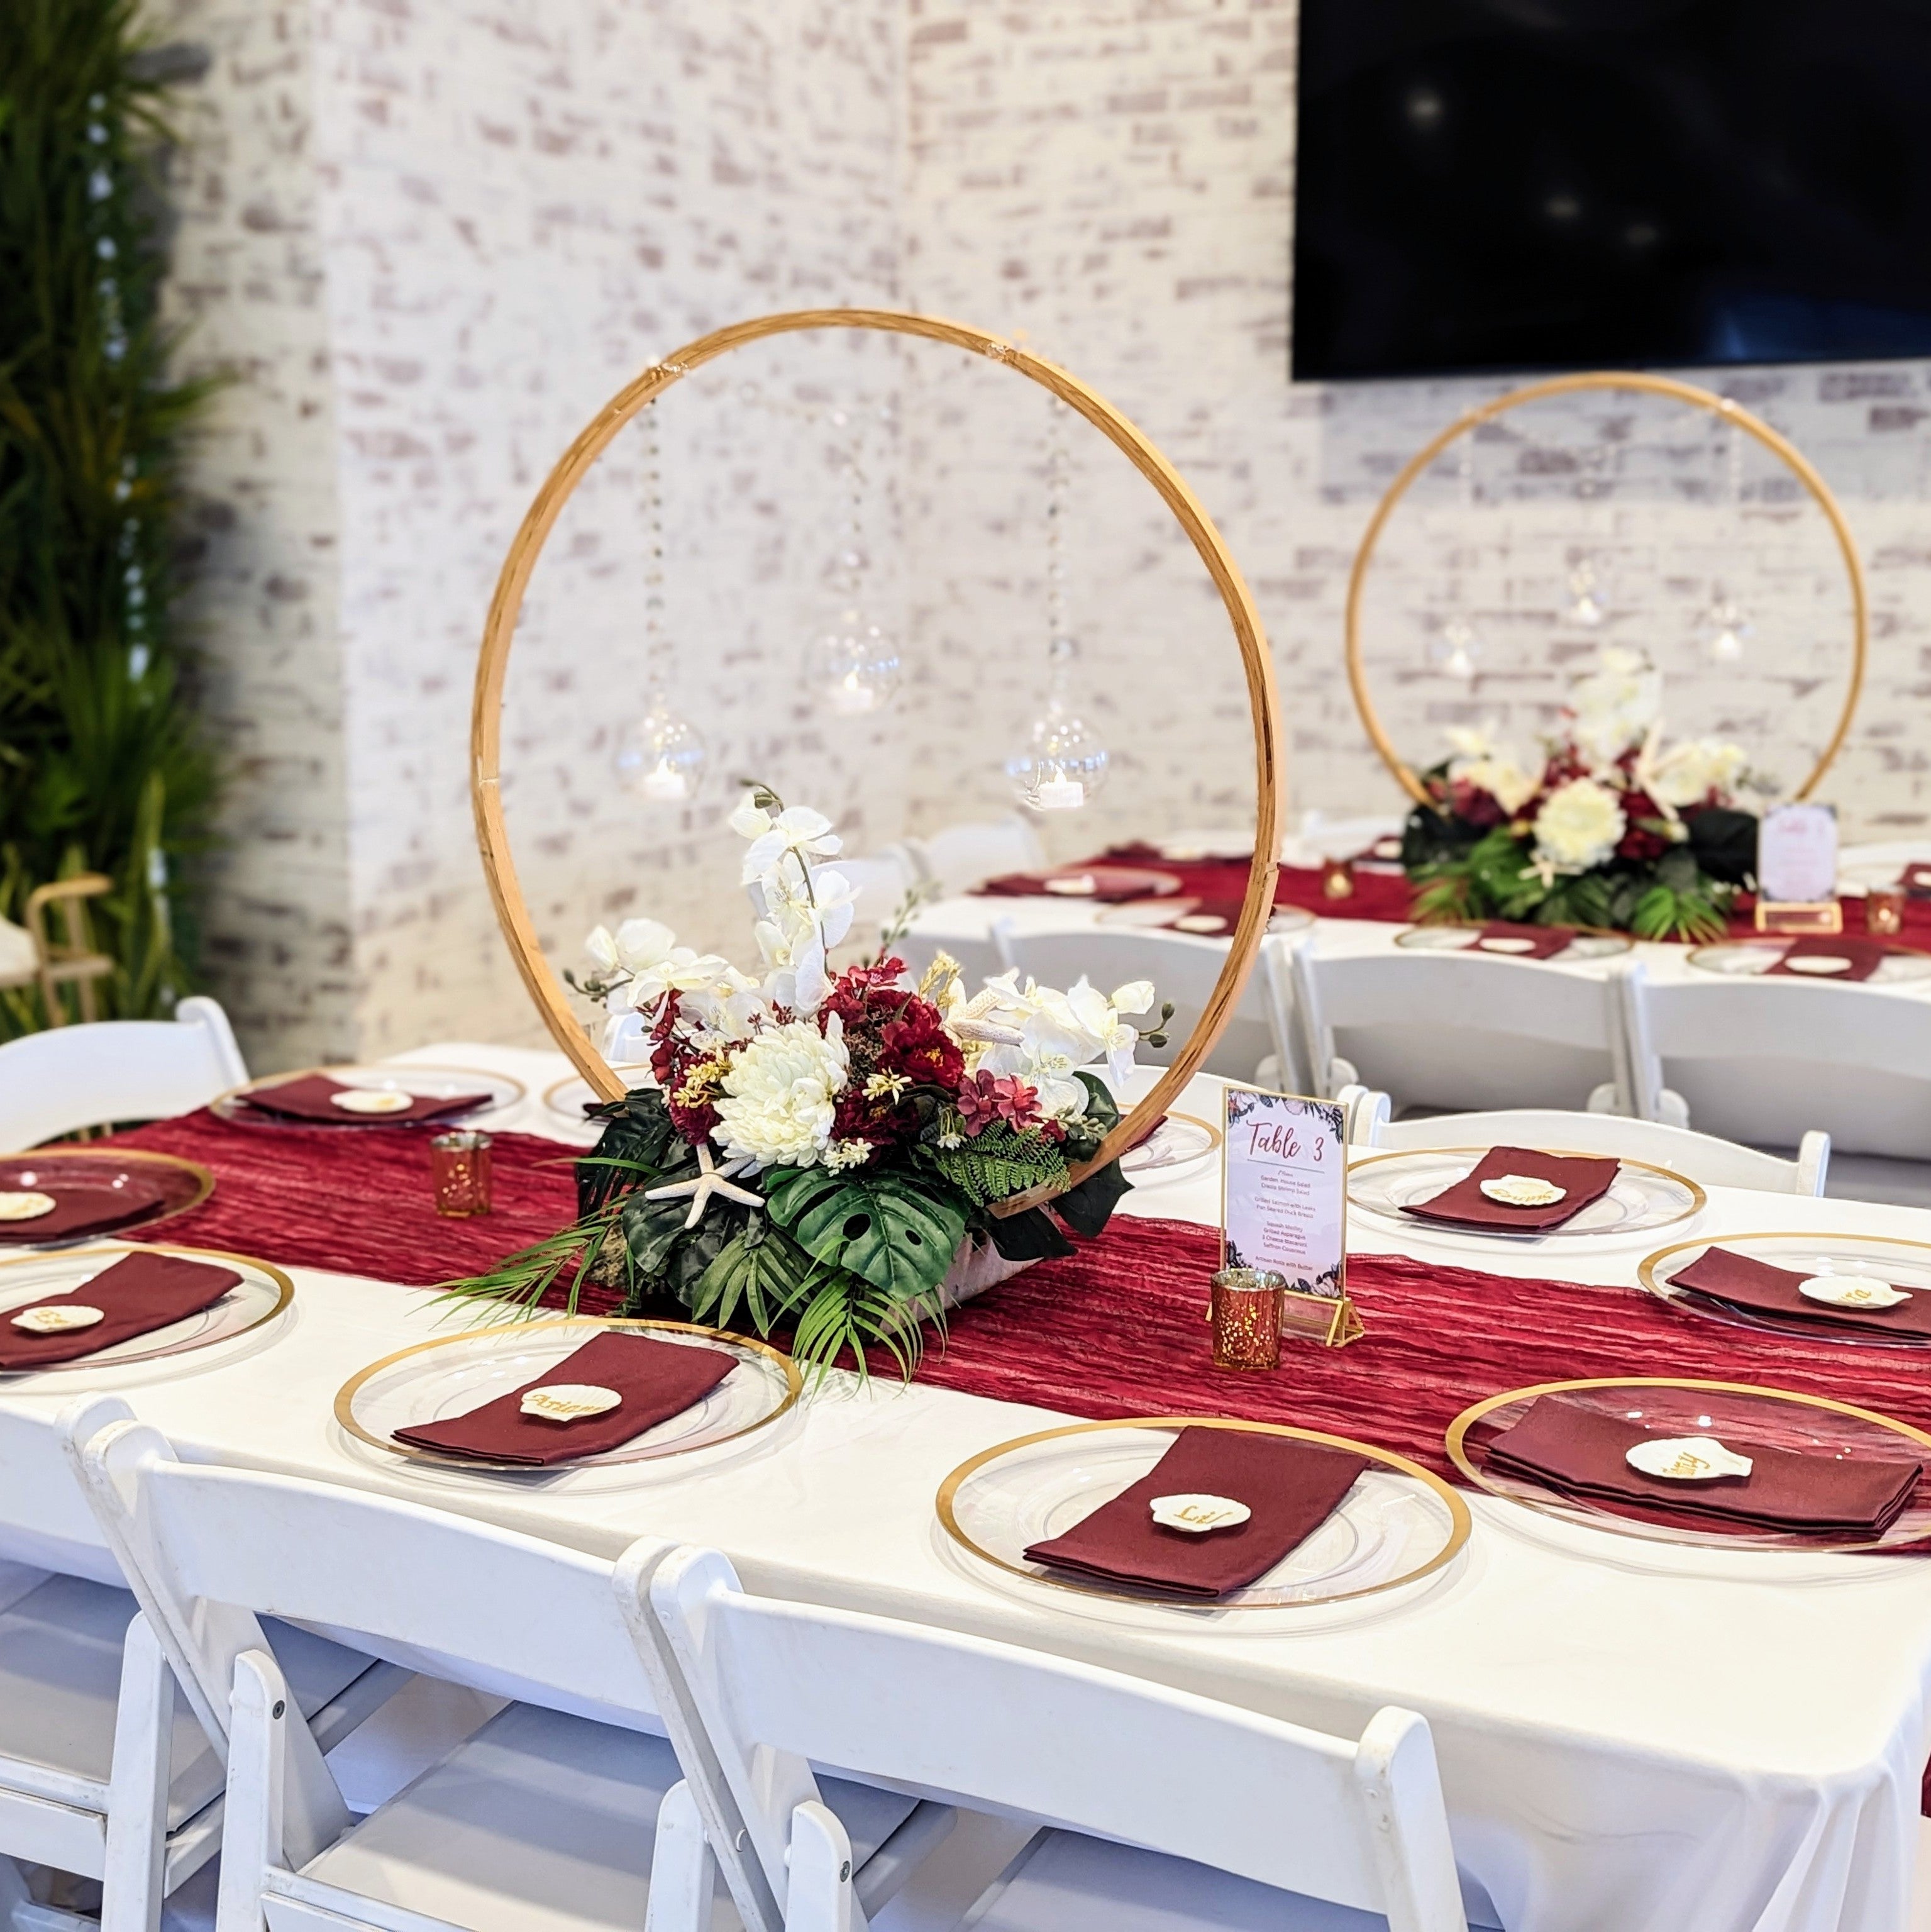 Cheesecloth Table Runner Burgundy Wedding Party Event Rental Panama City Beach